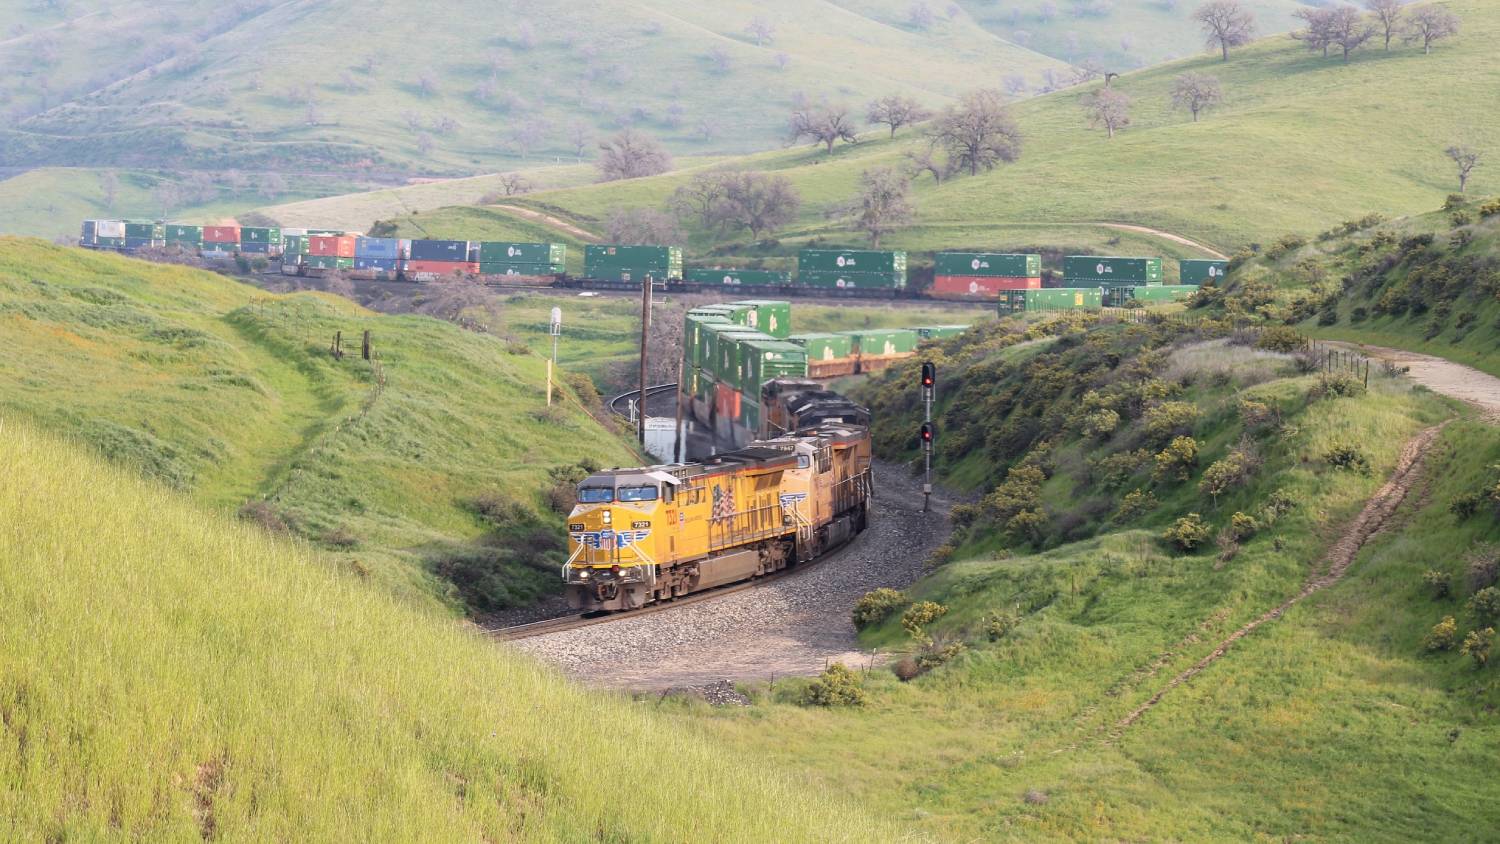 A freight train, led by several yellow Union Pacific locomotives, hauling shipping containers on a rail line winding through rolling green hills